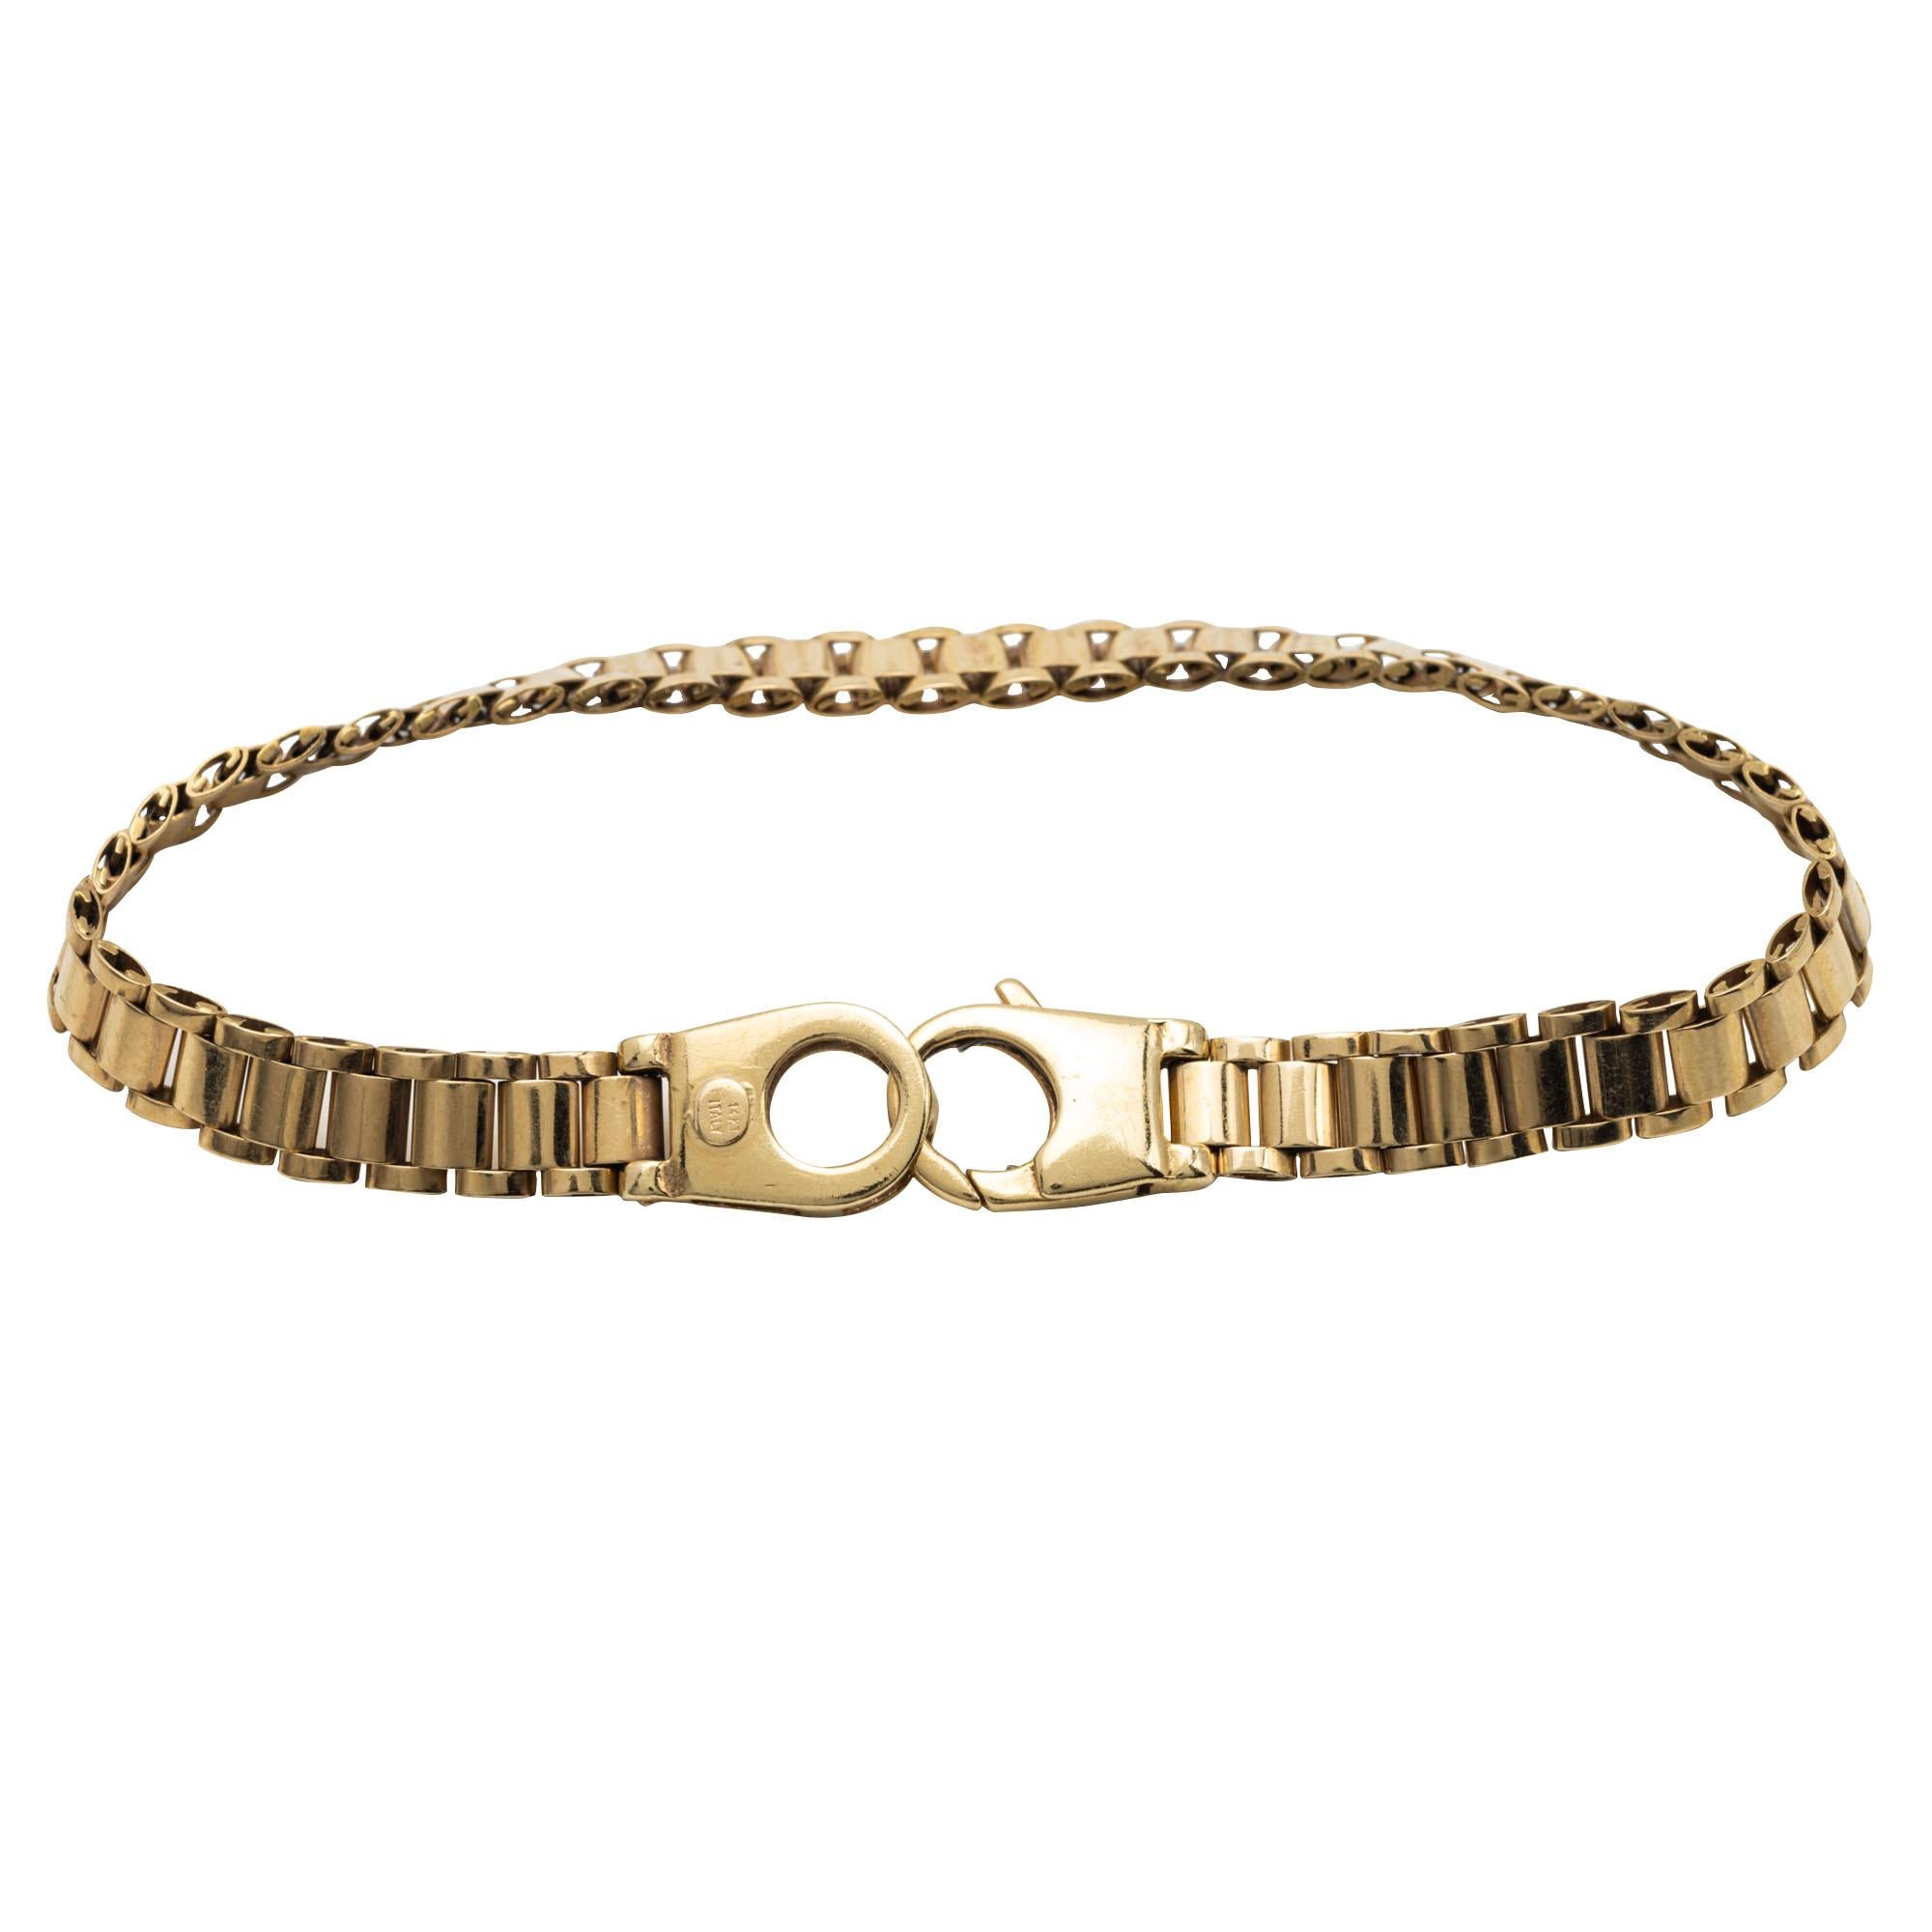 Gold Bracelet
Composed of curbed links 
Stamped 14K
14 karat yellow gold.
Length approximately 7 1/2 inches.
Total weight approximately 12 grams